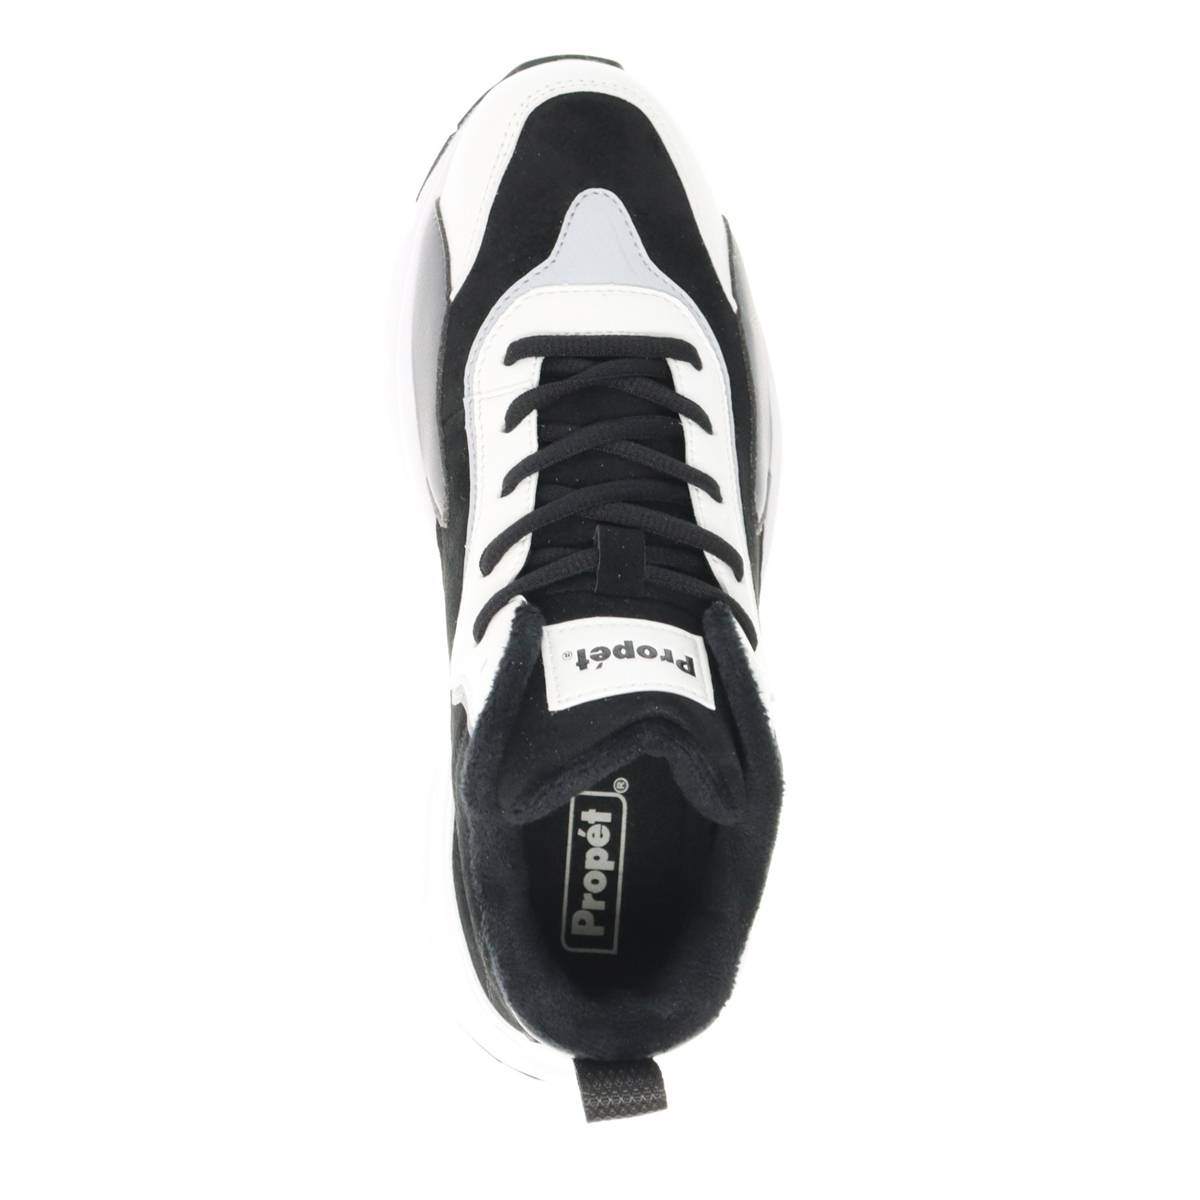 Mens Propet(R) Stability Mid Sneakers